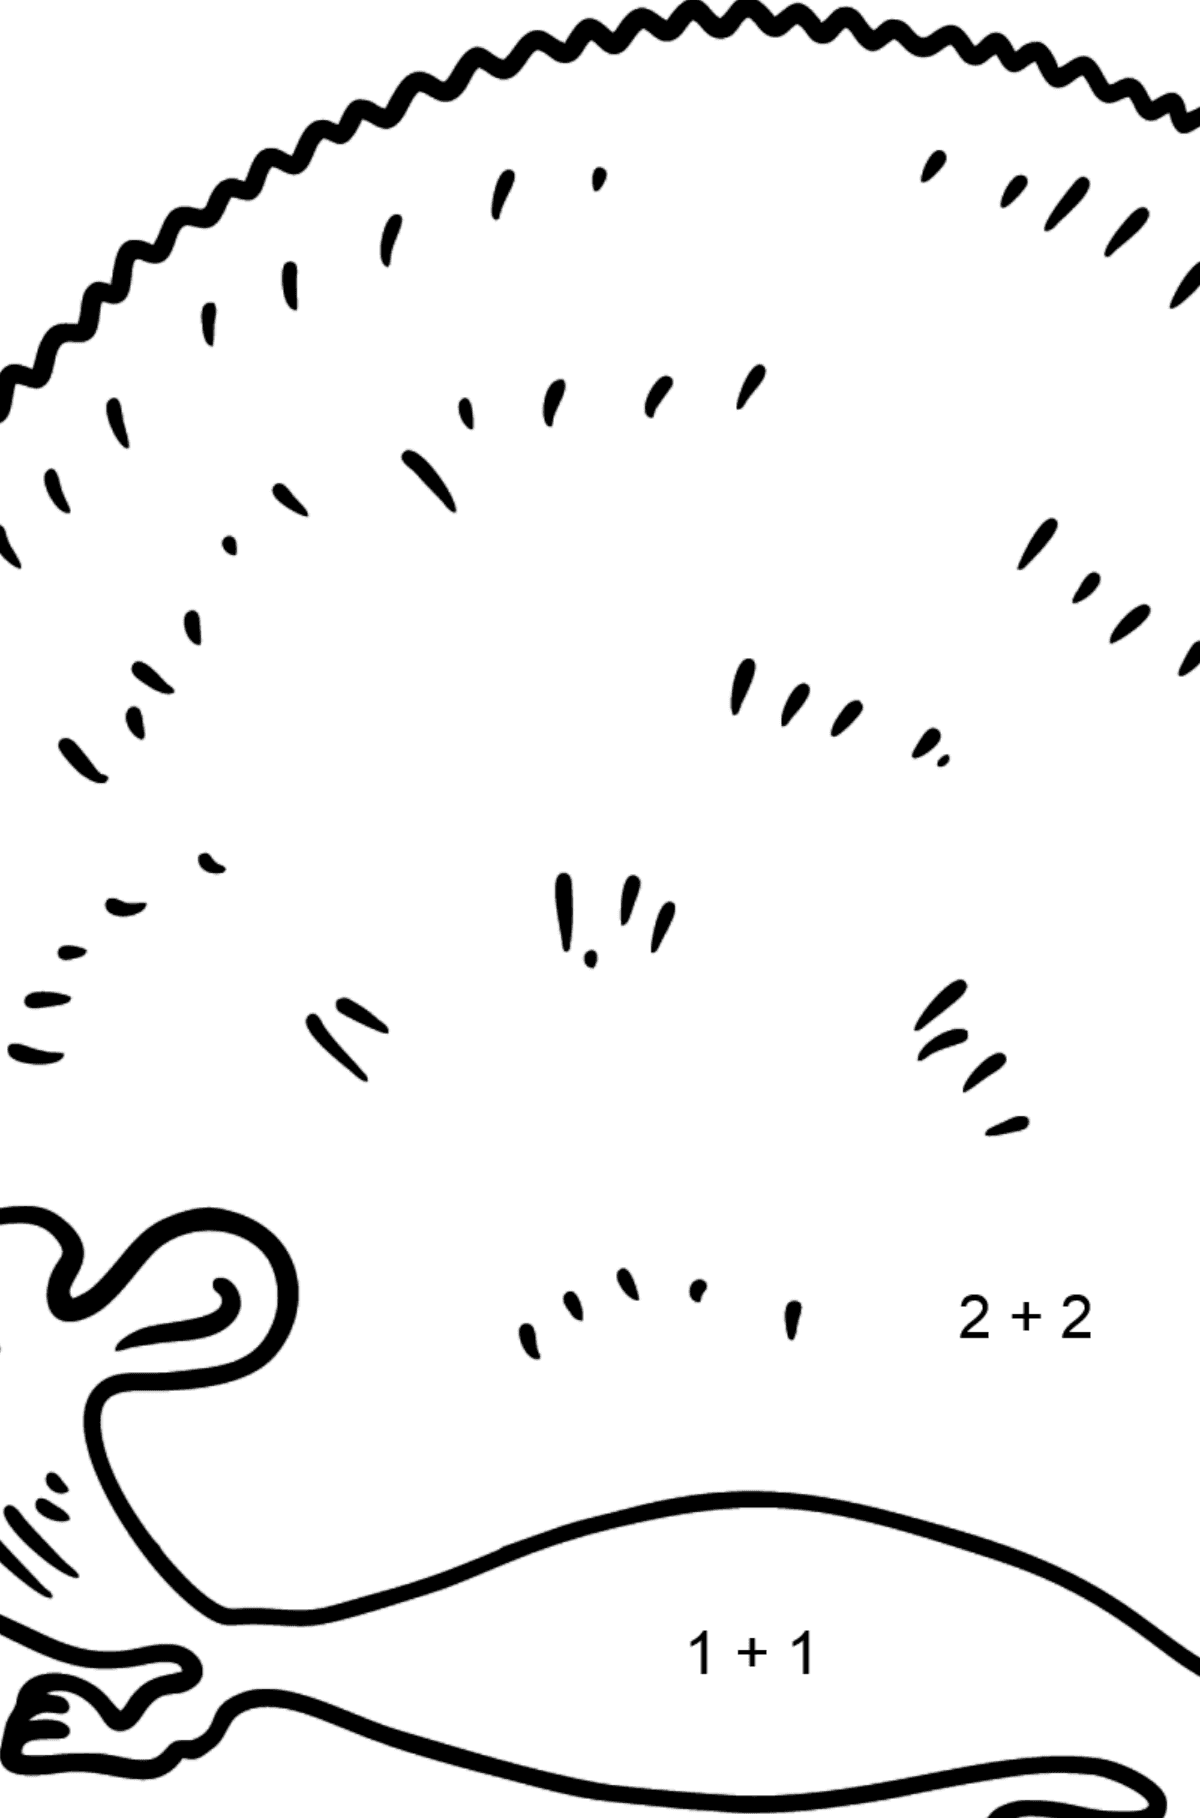 Hedgehog coloring page - Math Coloring - Addition for Kids